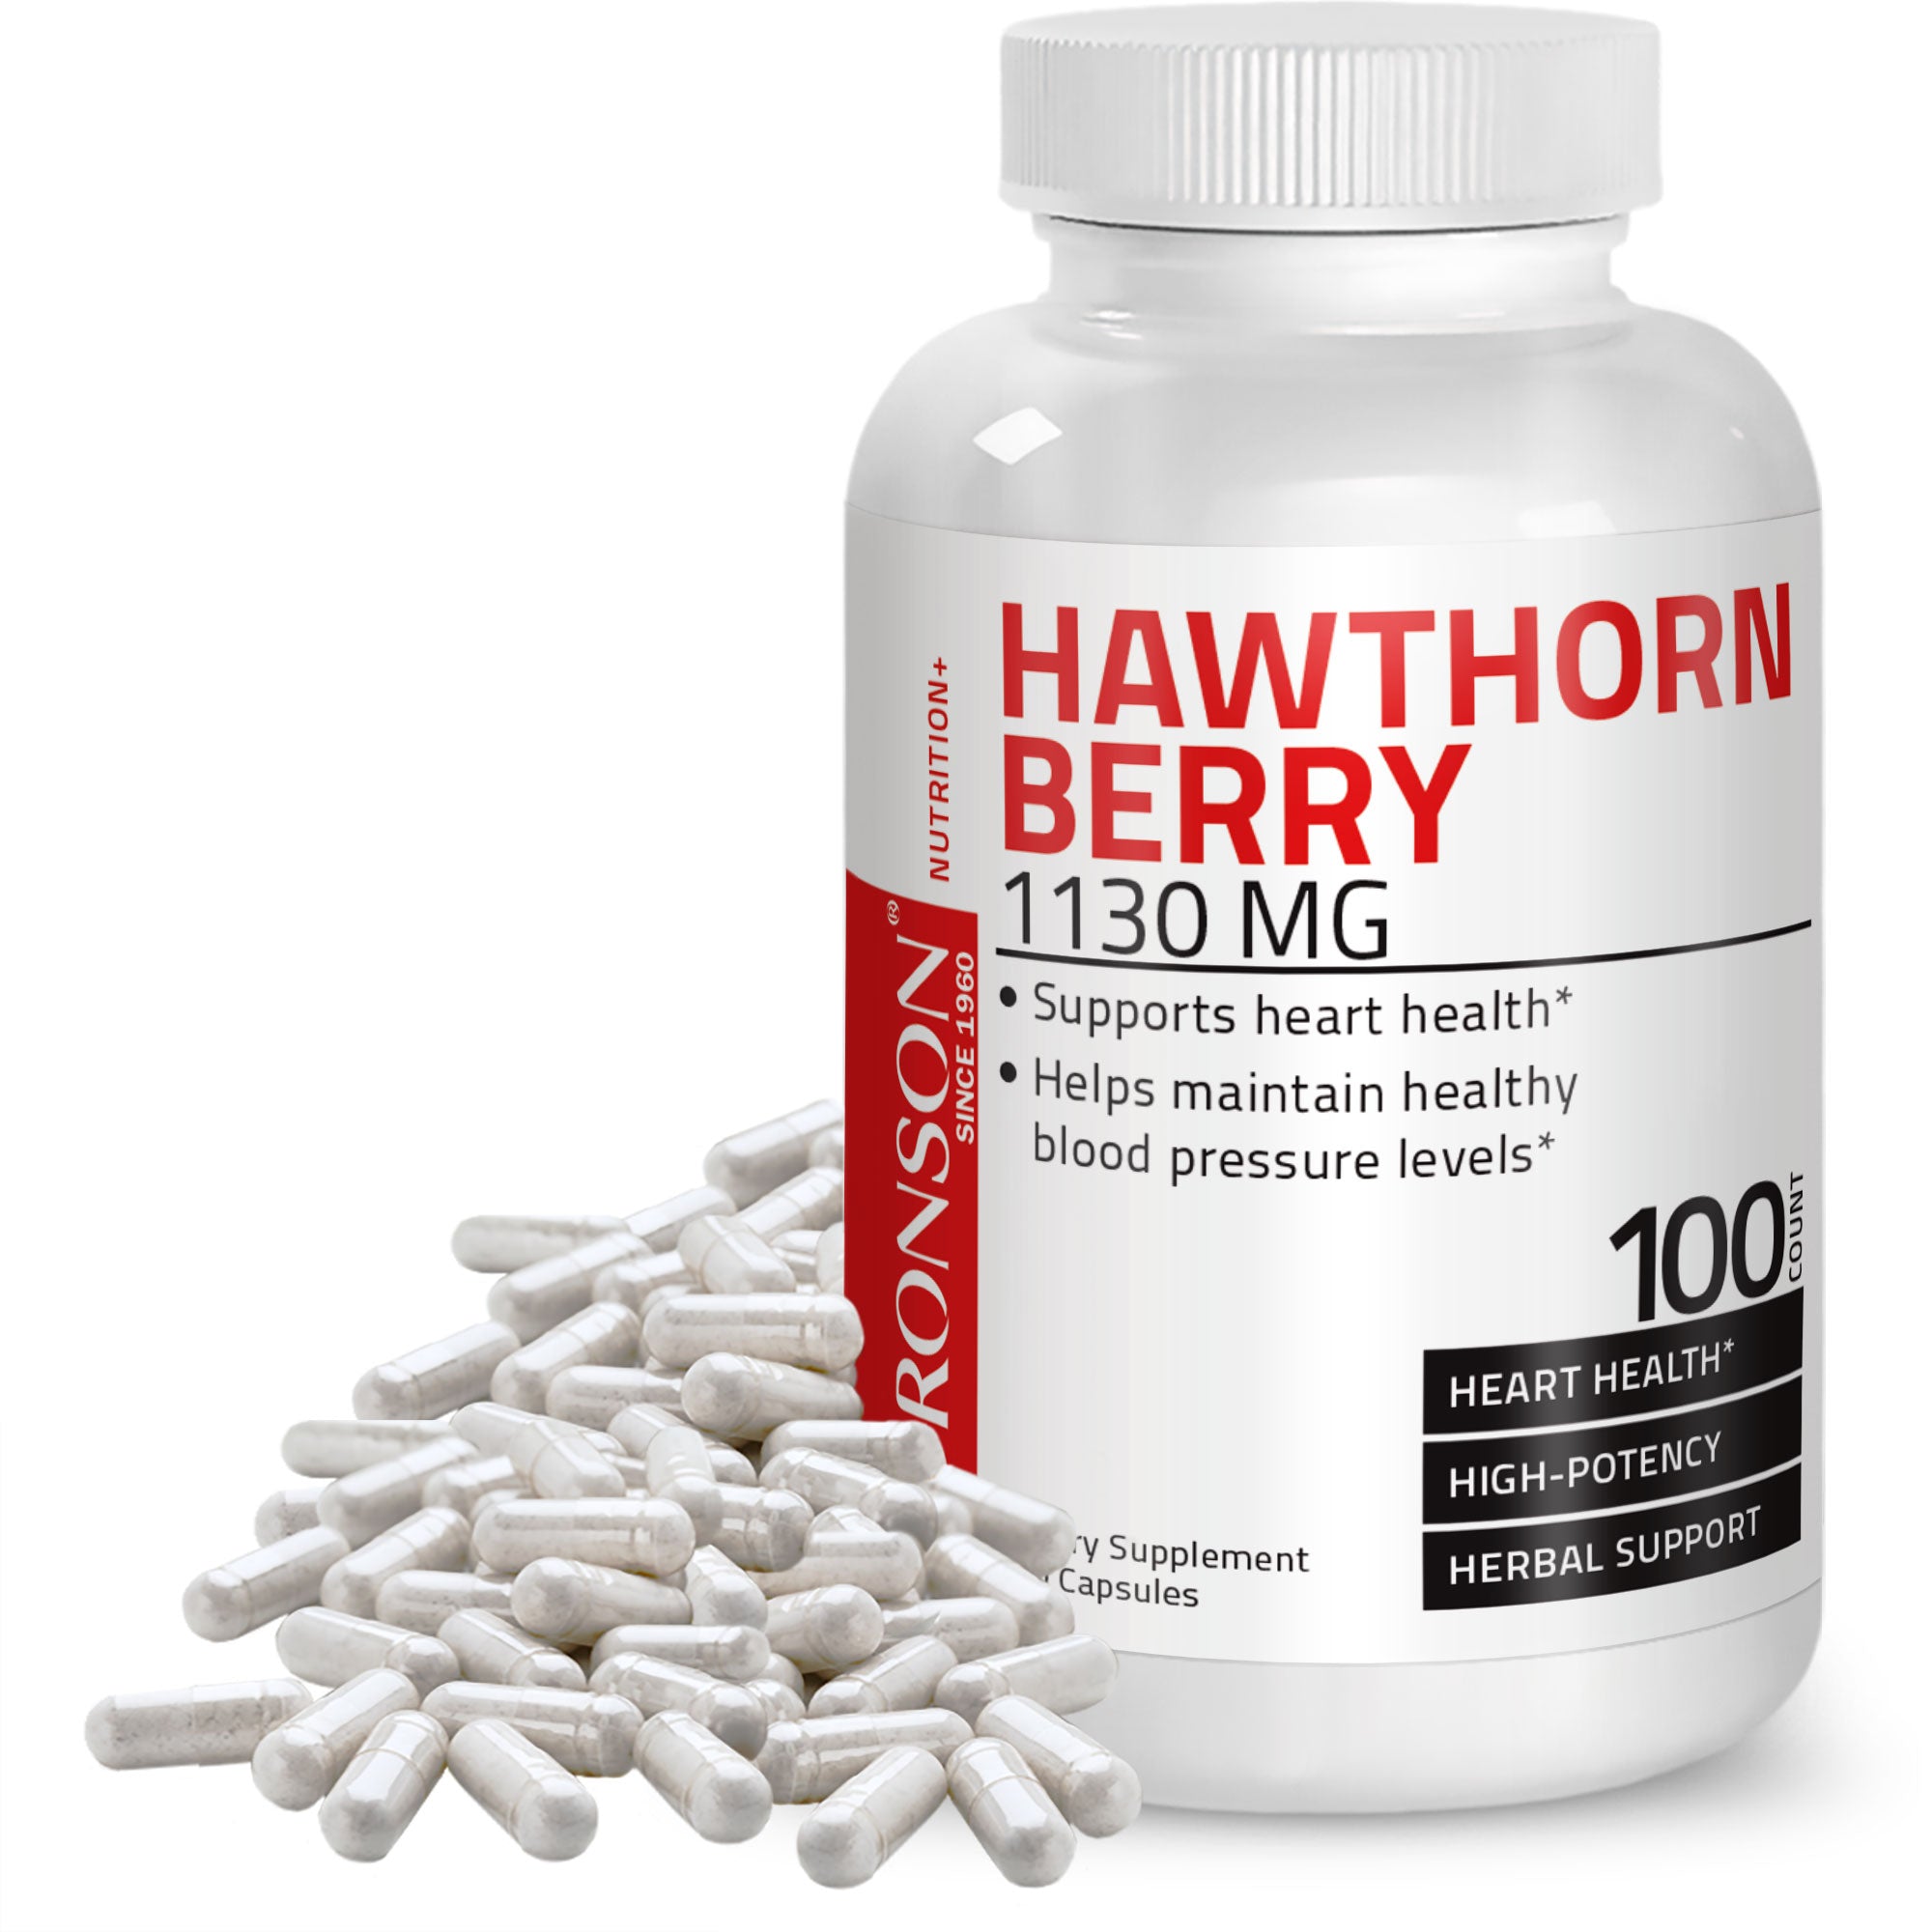 Hawthorn Berry - 1,130 mg - 100 Capsules view 1 of 6